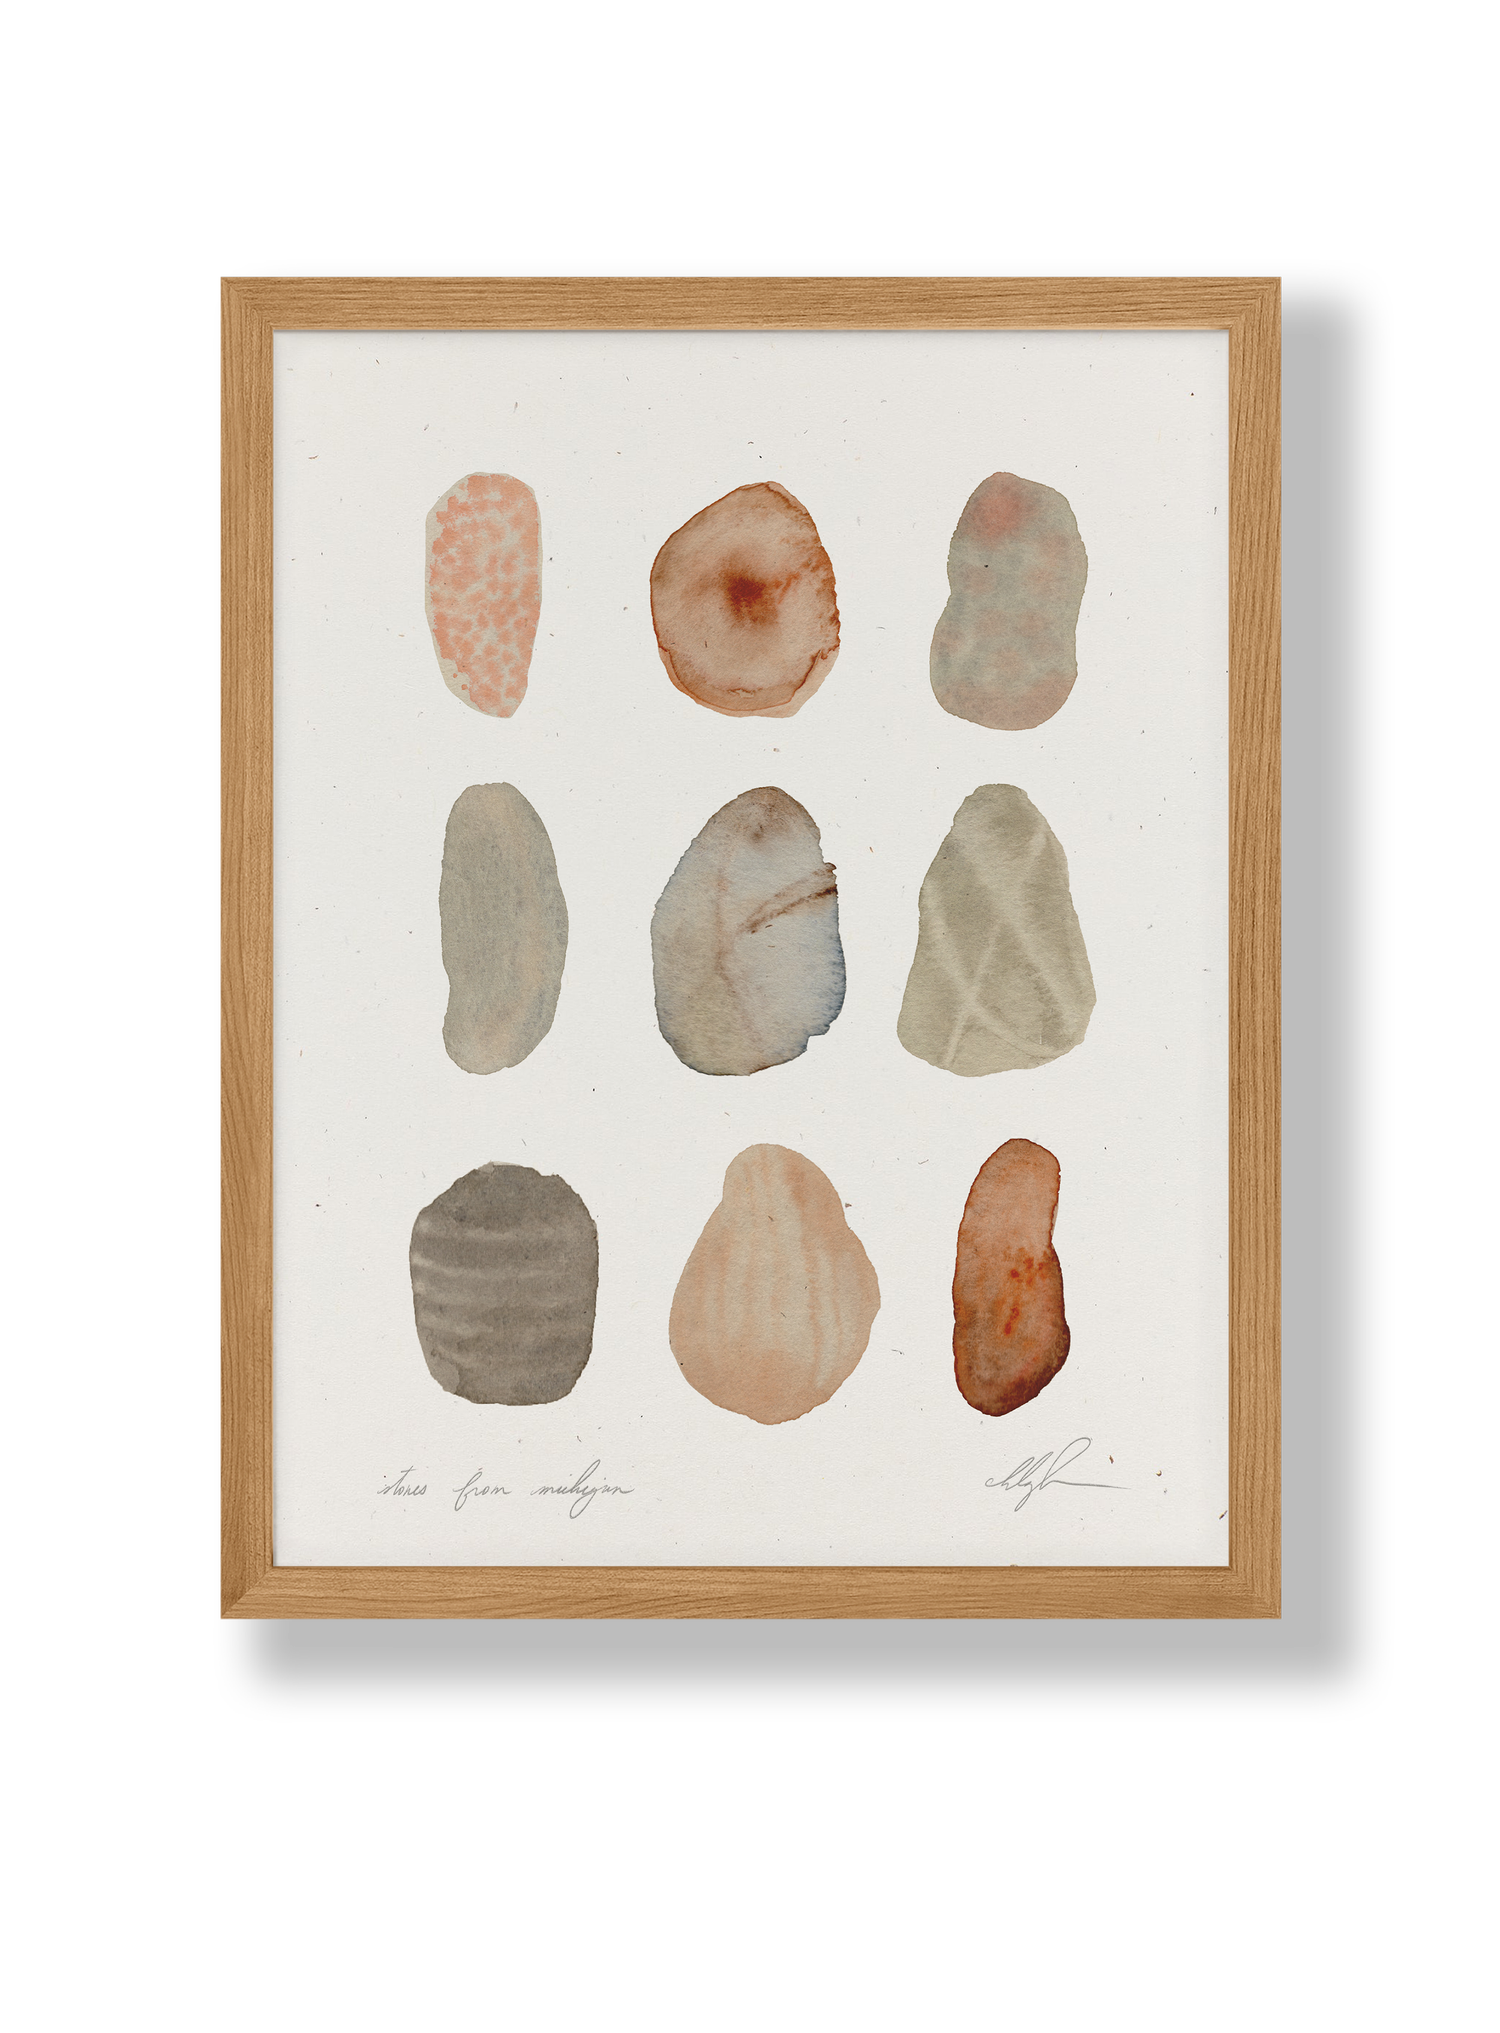 Stones From Michigan by Coco Shalom.  Prints are made with 100% recycled paper, containing 30% post consumer waste, produced with 100% green power  and 0% BS